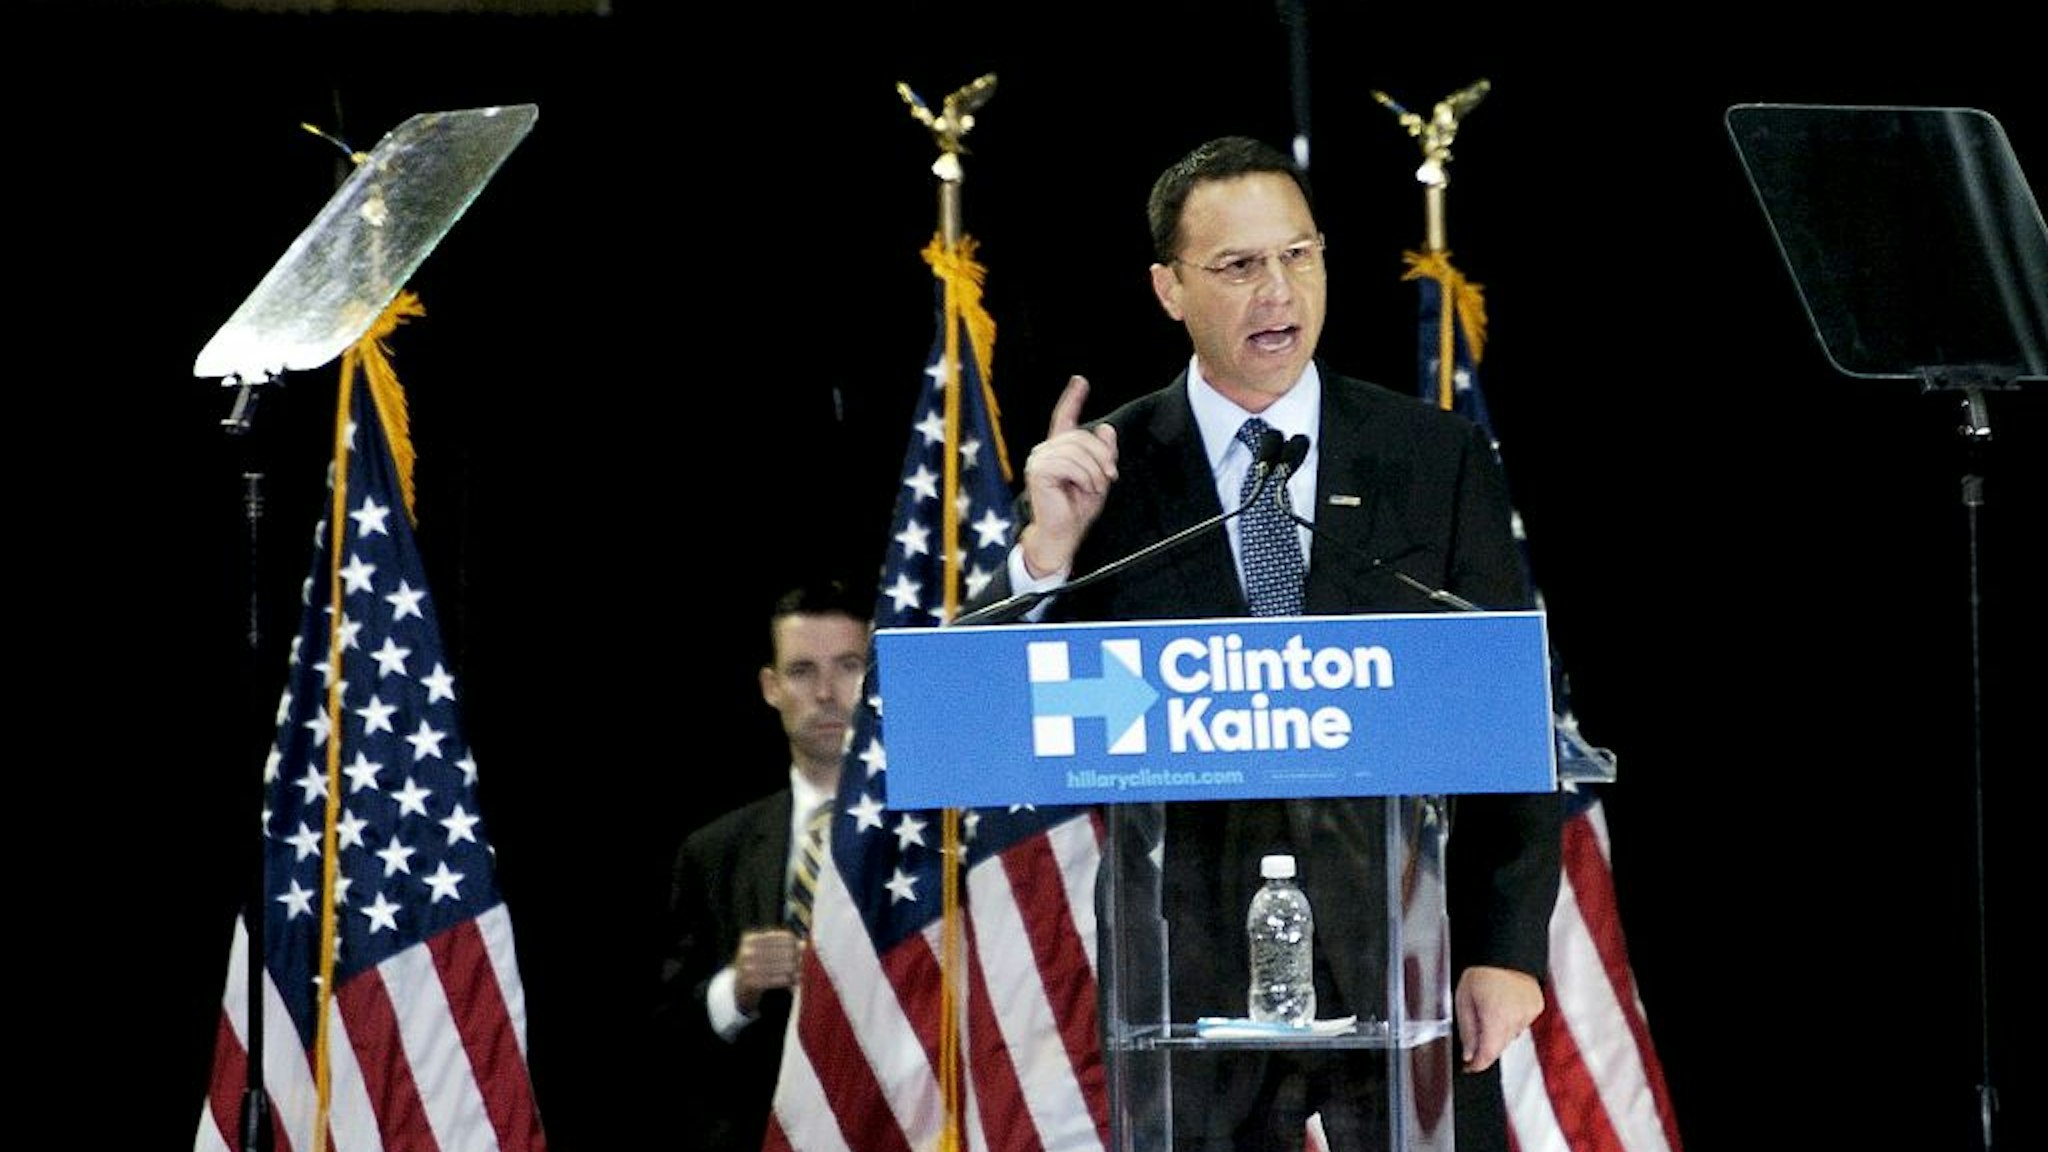 Candidate for Pennsylvania Attorney General Josh Shapiro promises criminal justice reform in a speech at LaSalle University in Philadelphia, PA on September 28, 2016.